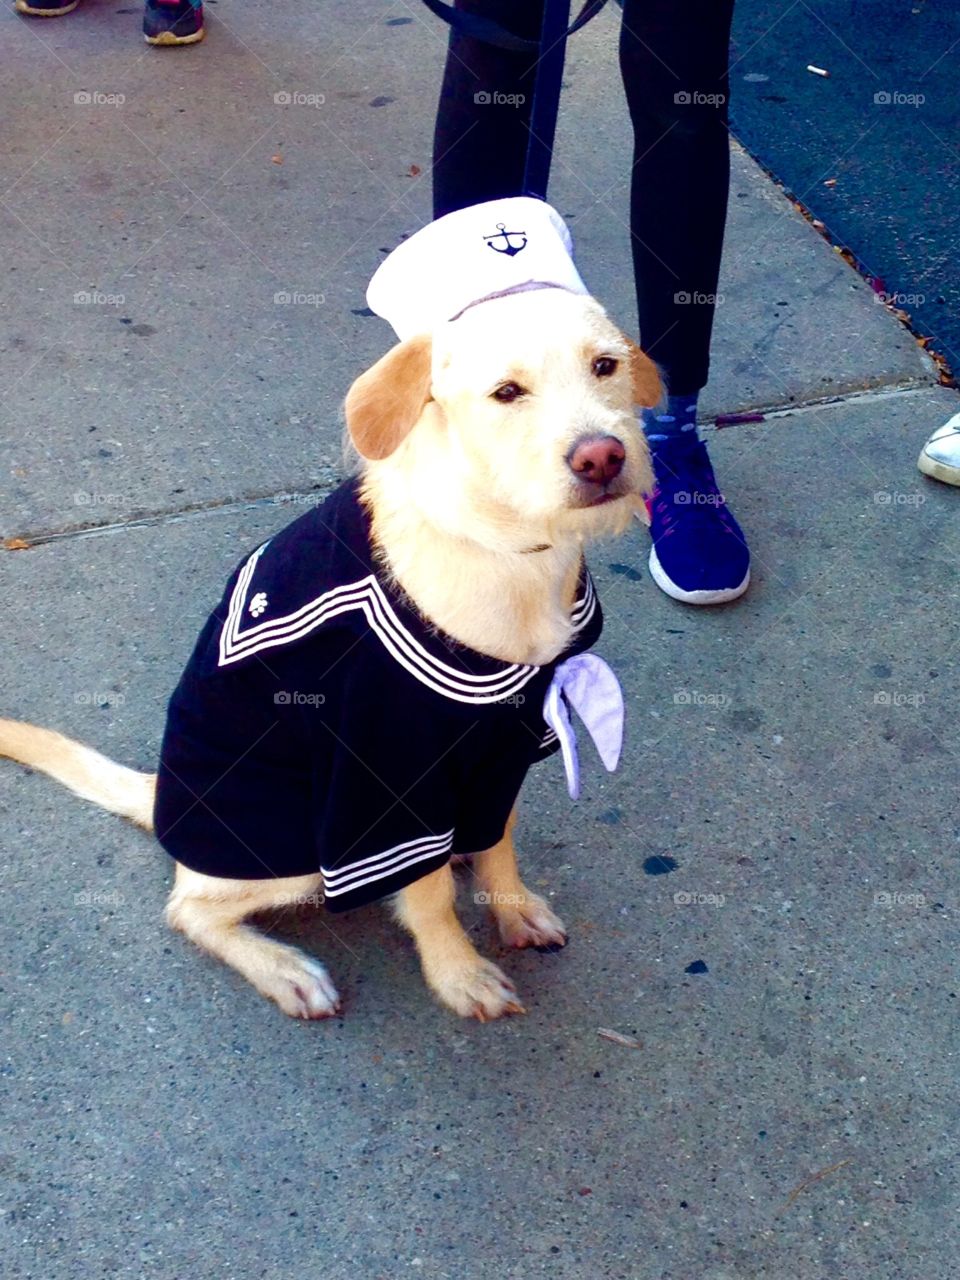 Pet parade and costume contest. Sailor pup